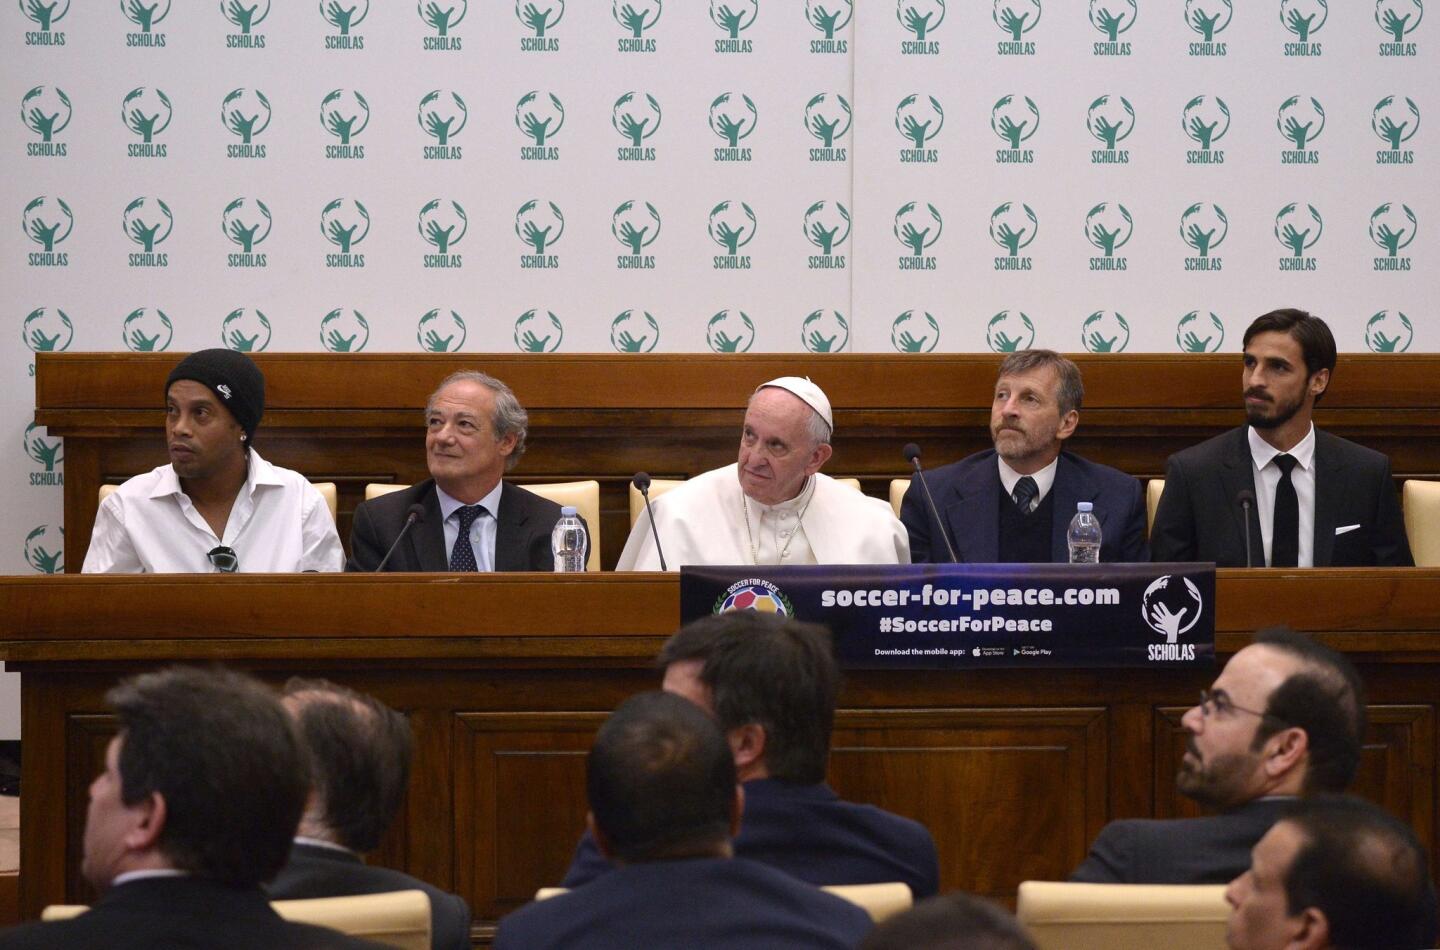 VATICAN-POPE-FBL-CHARITY